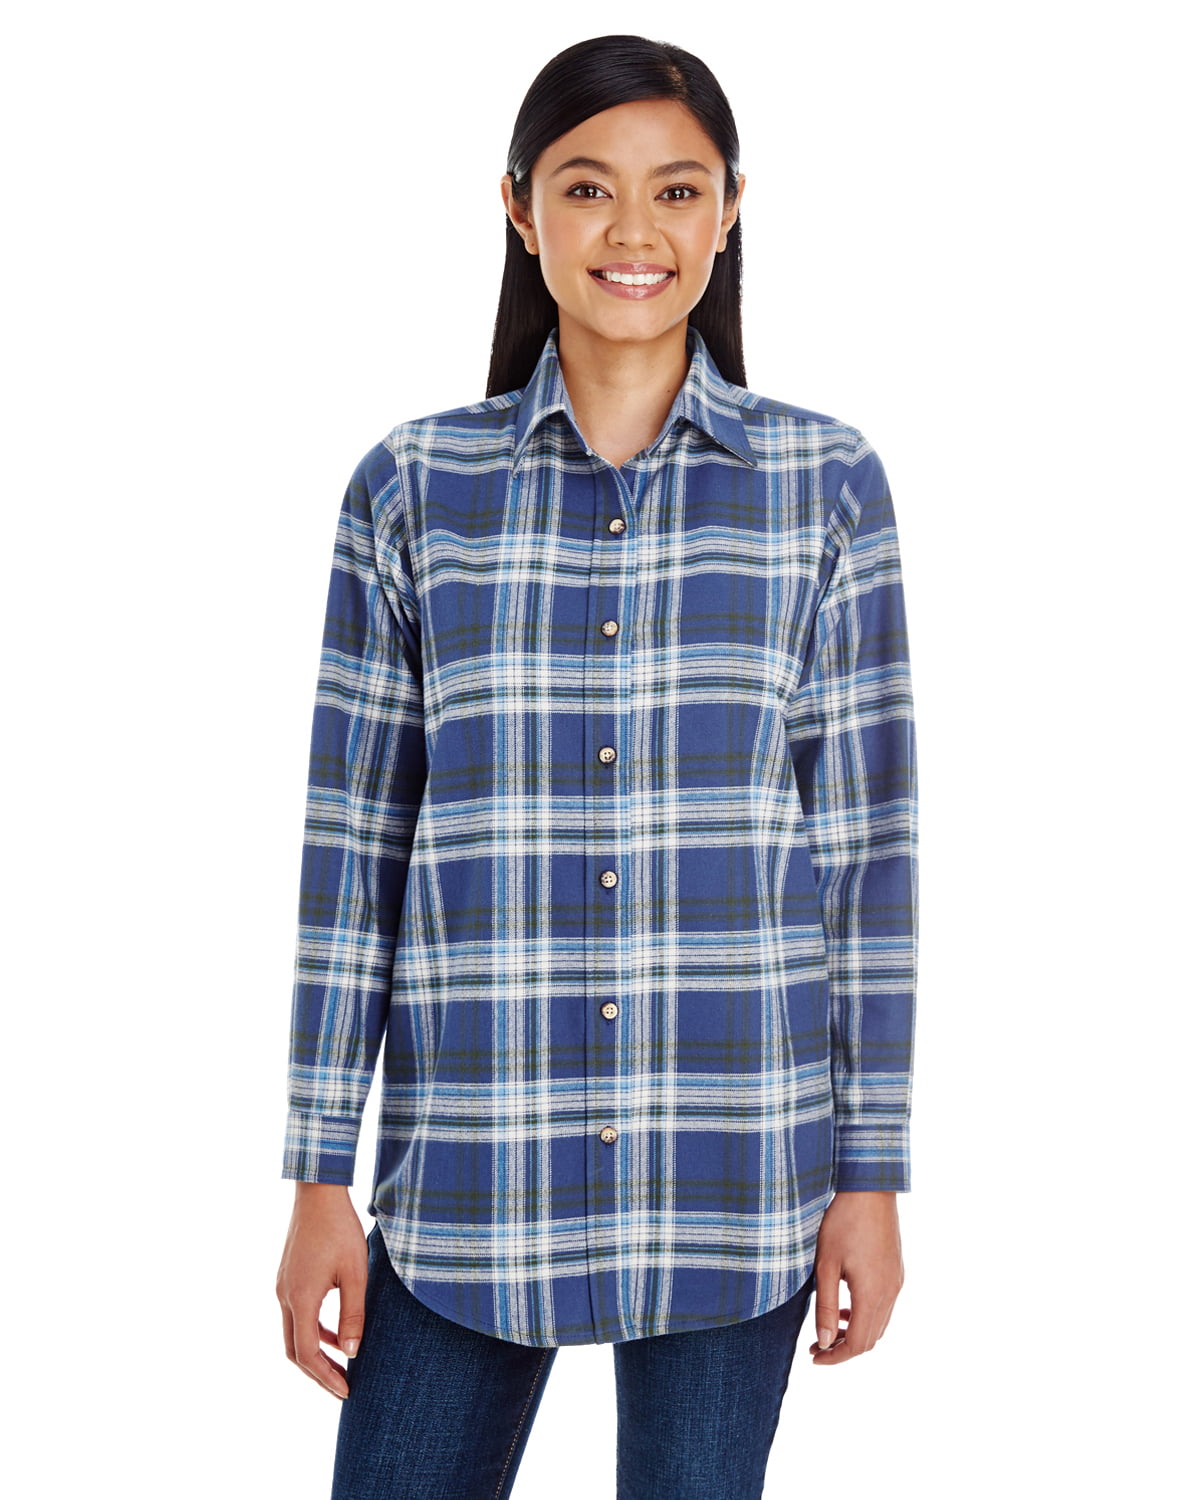 Backpacker Men's Solid Flannel Shirts 100% Cotton Peaches Pick Sizes S-3XL 